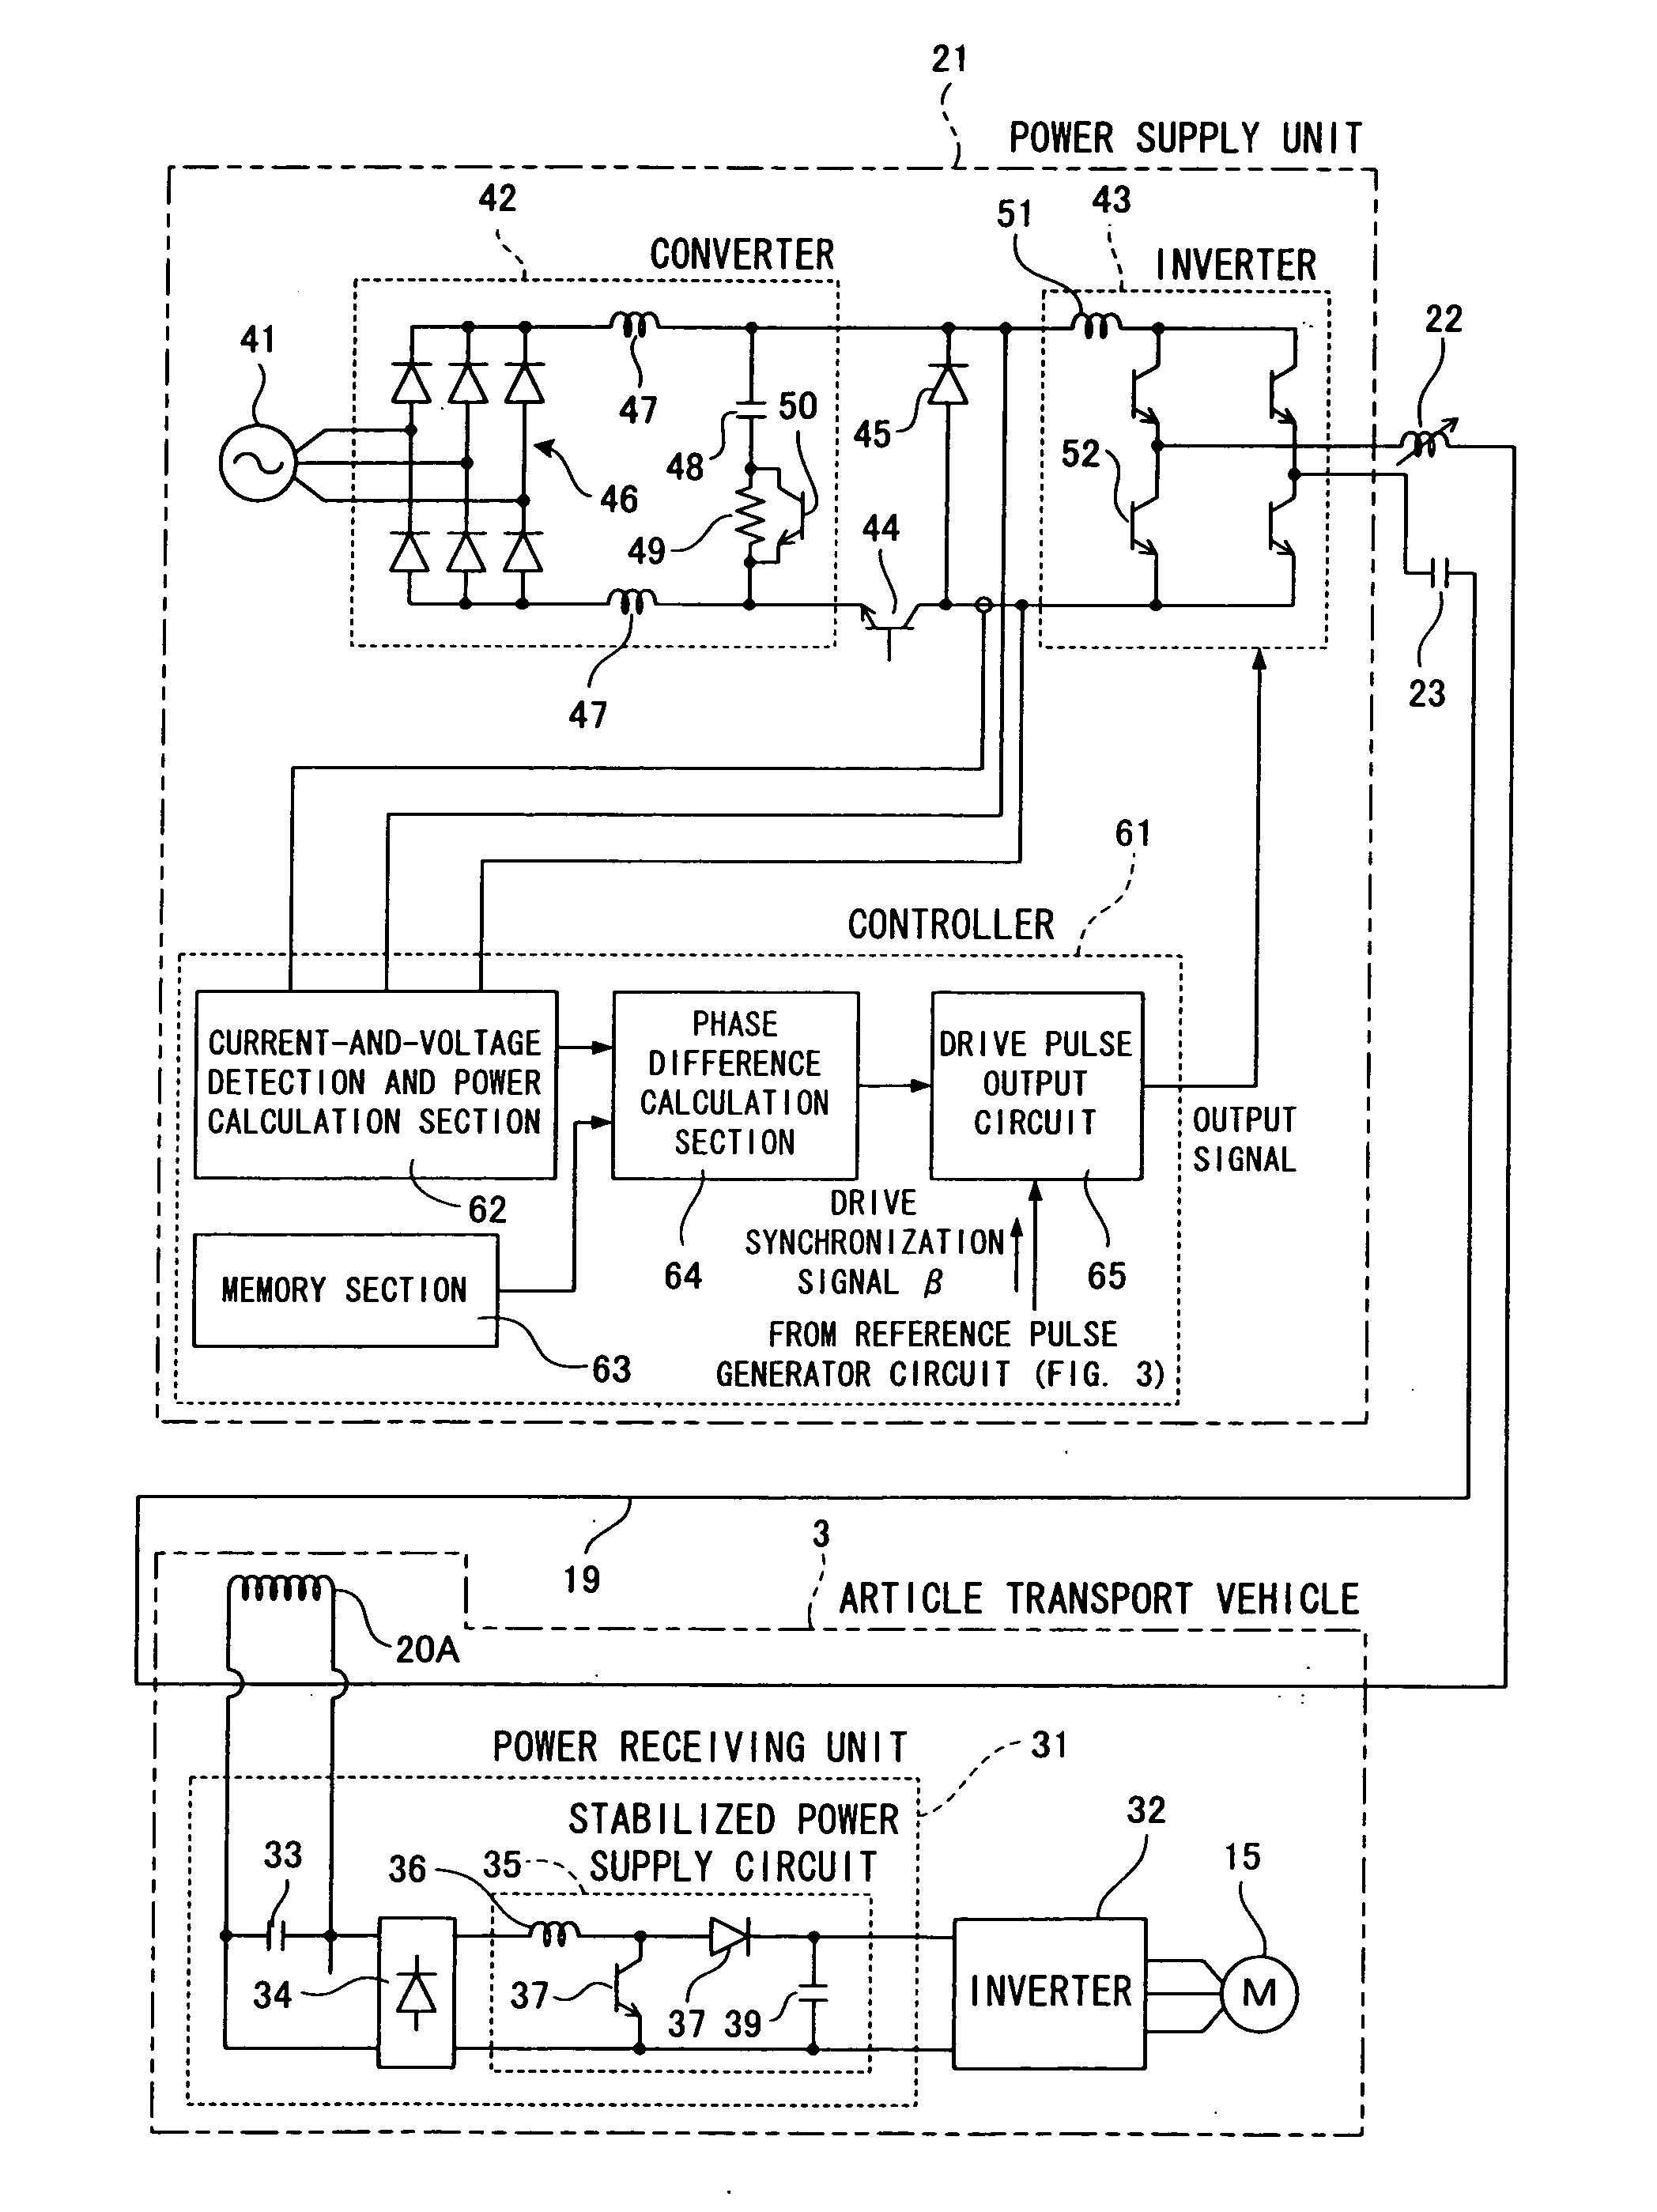 Non-Contact Power Supply System